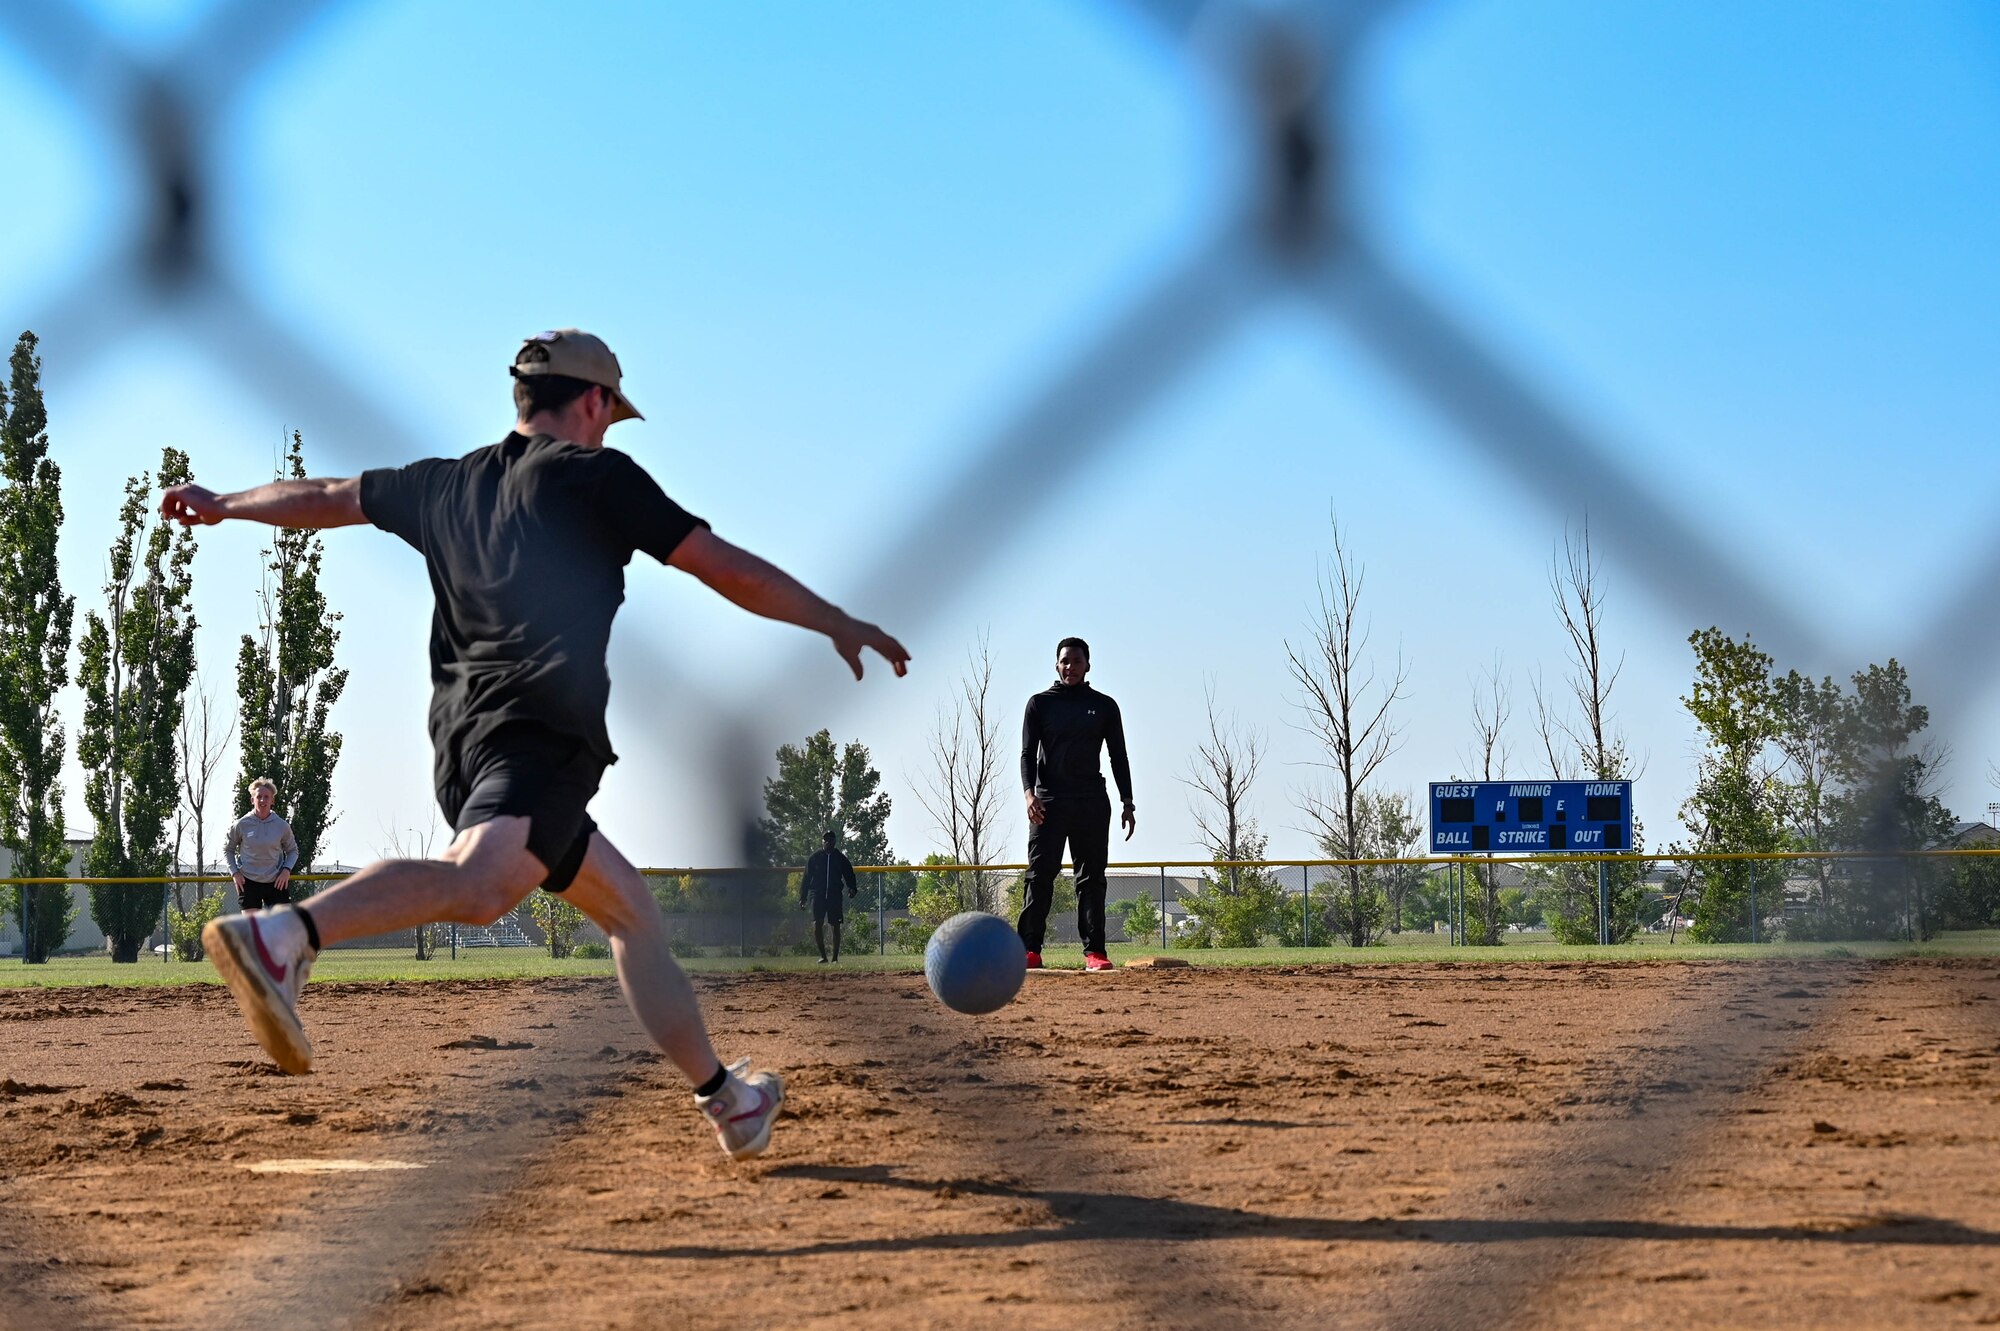 An Airman participating in the 2023 Summer Games at Minot Air Force Base, North Dakota, kicks a ball during the Kickball tournament Aug. 25, 2023. The annual Summer Games are put on by the 5th Force Support Squadron to promote physical health, camaraderie and competition. (U.S. Air Force photo by Senior Airman Zachary Wright)